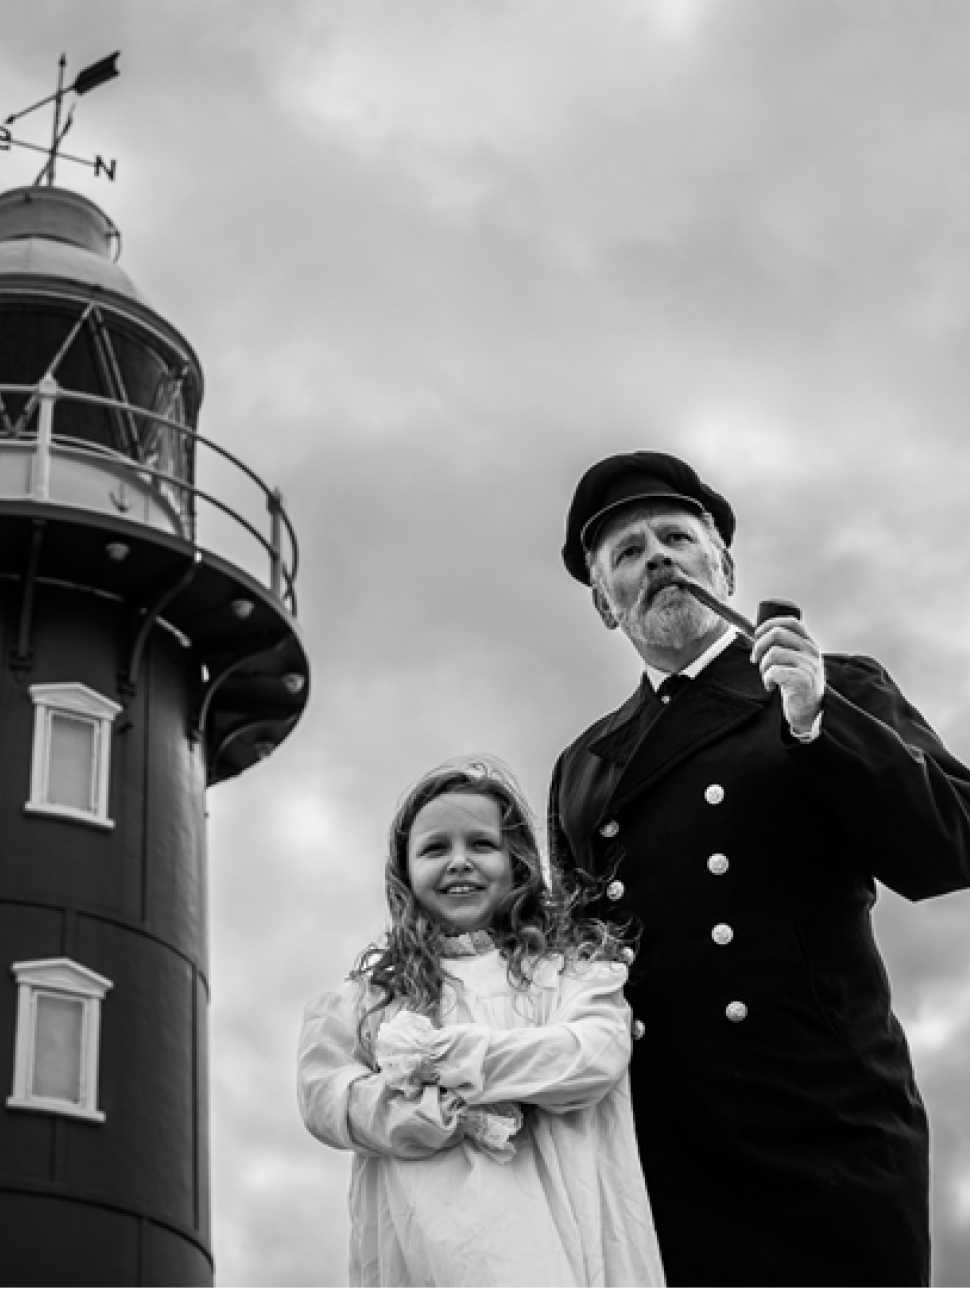 a black and white image of a lighthouse and two people standing in the foreground. One person is an adult, has a beard and wears a uniform smoking a pipe standing next to a young child with long hair and light coloured dress crossing their arms.